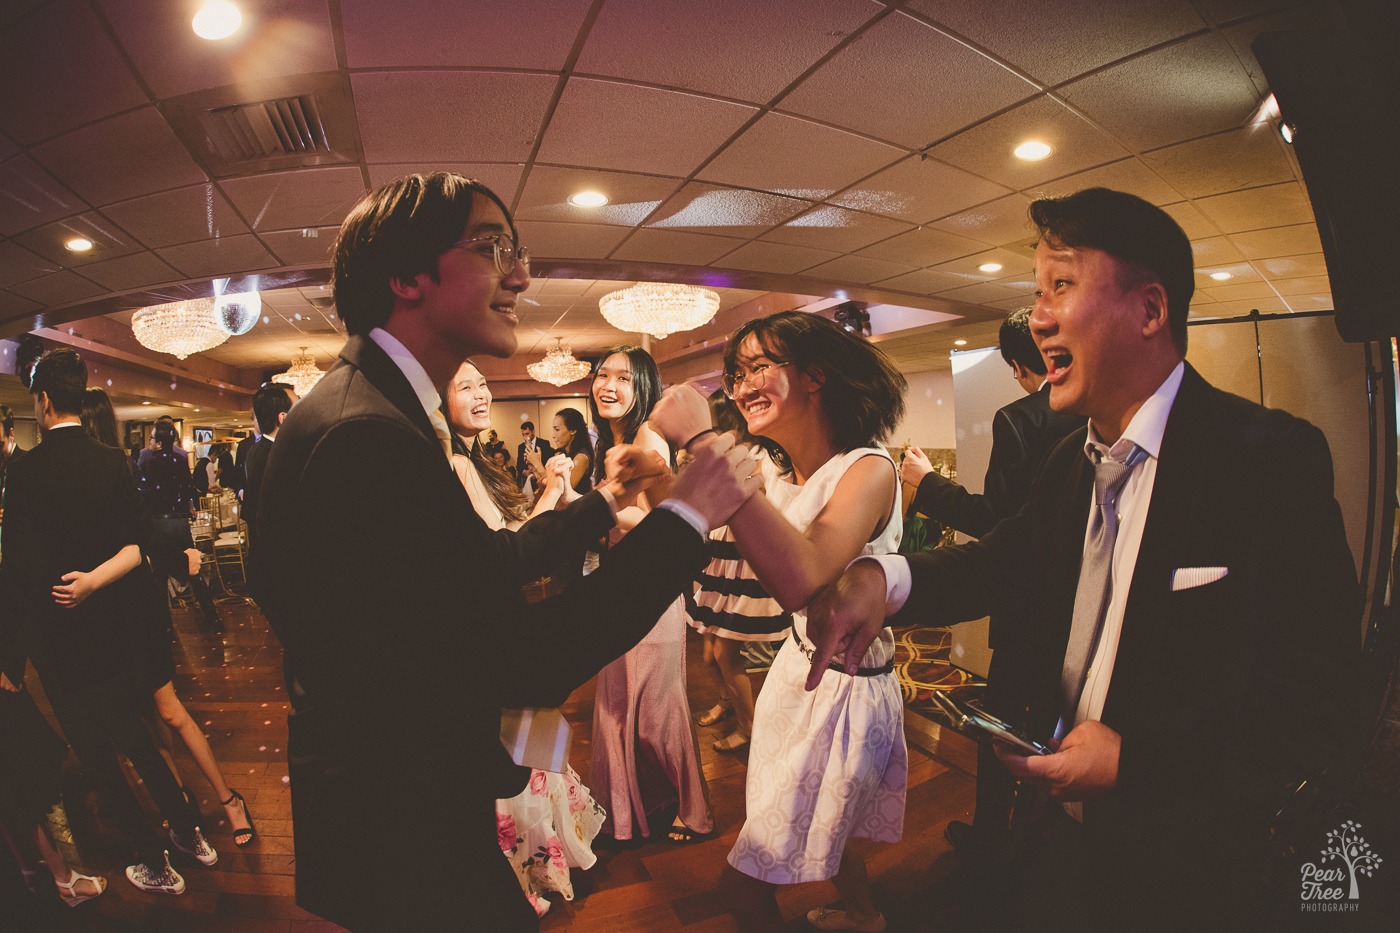 Asian dad dancing and having fun with his teenage children on the dance floor at a wedding reception